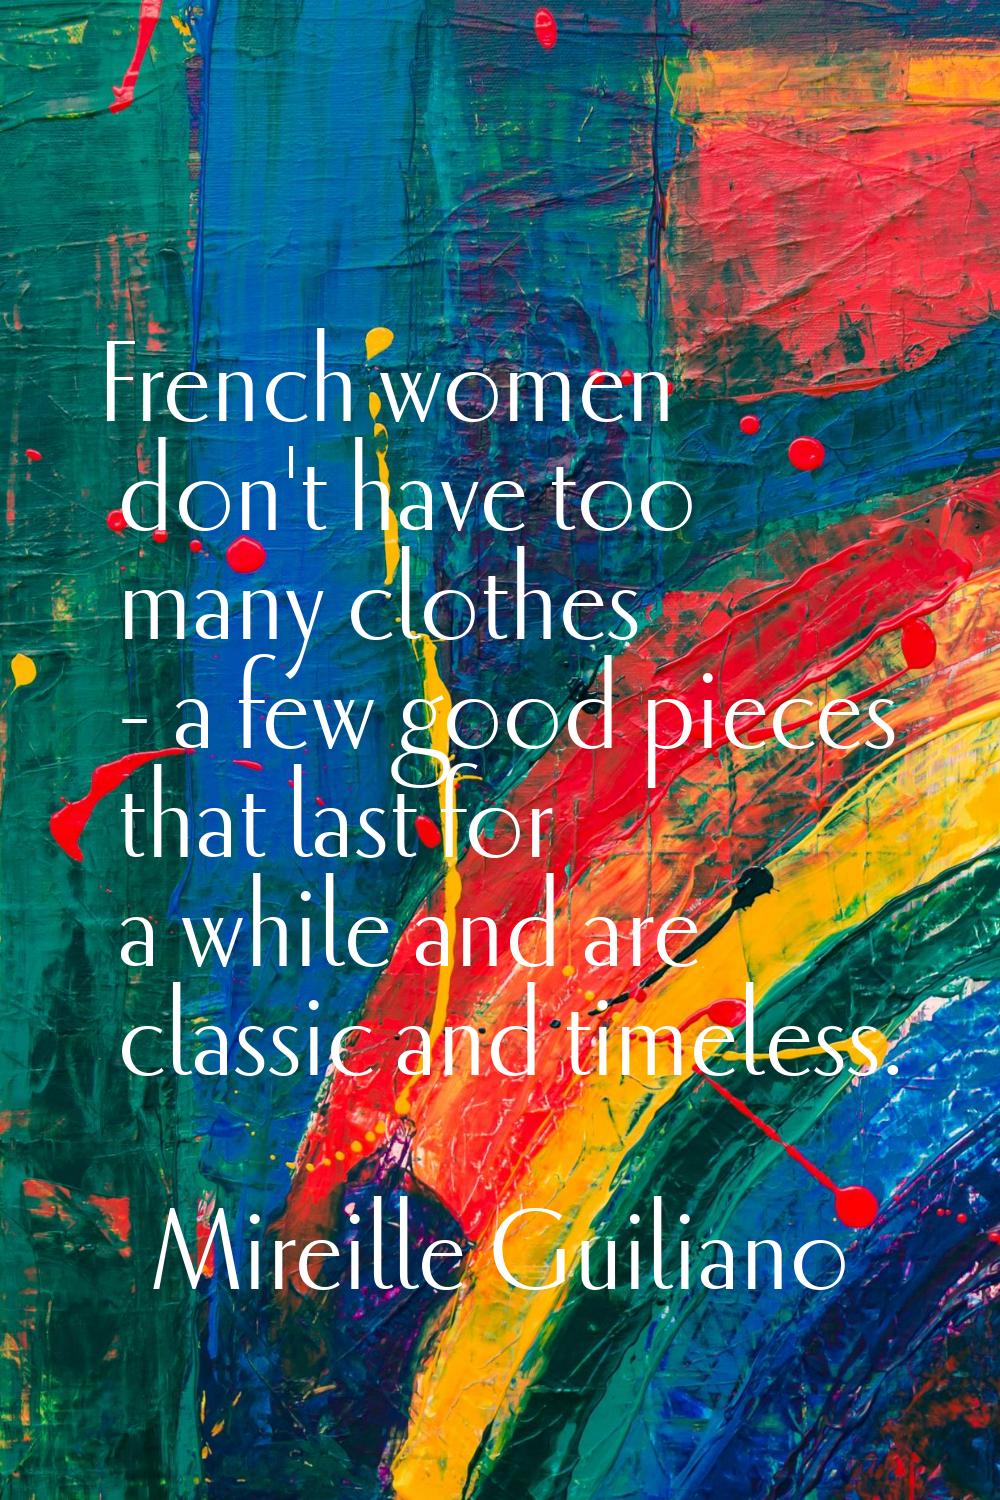 French women don't have too many clothes - a few good pieces that last for a while and are classic 